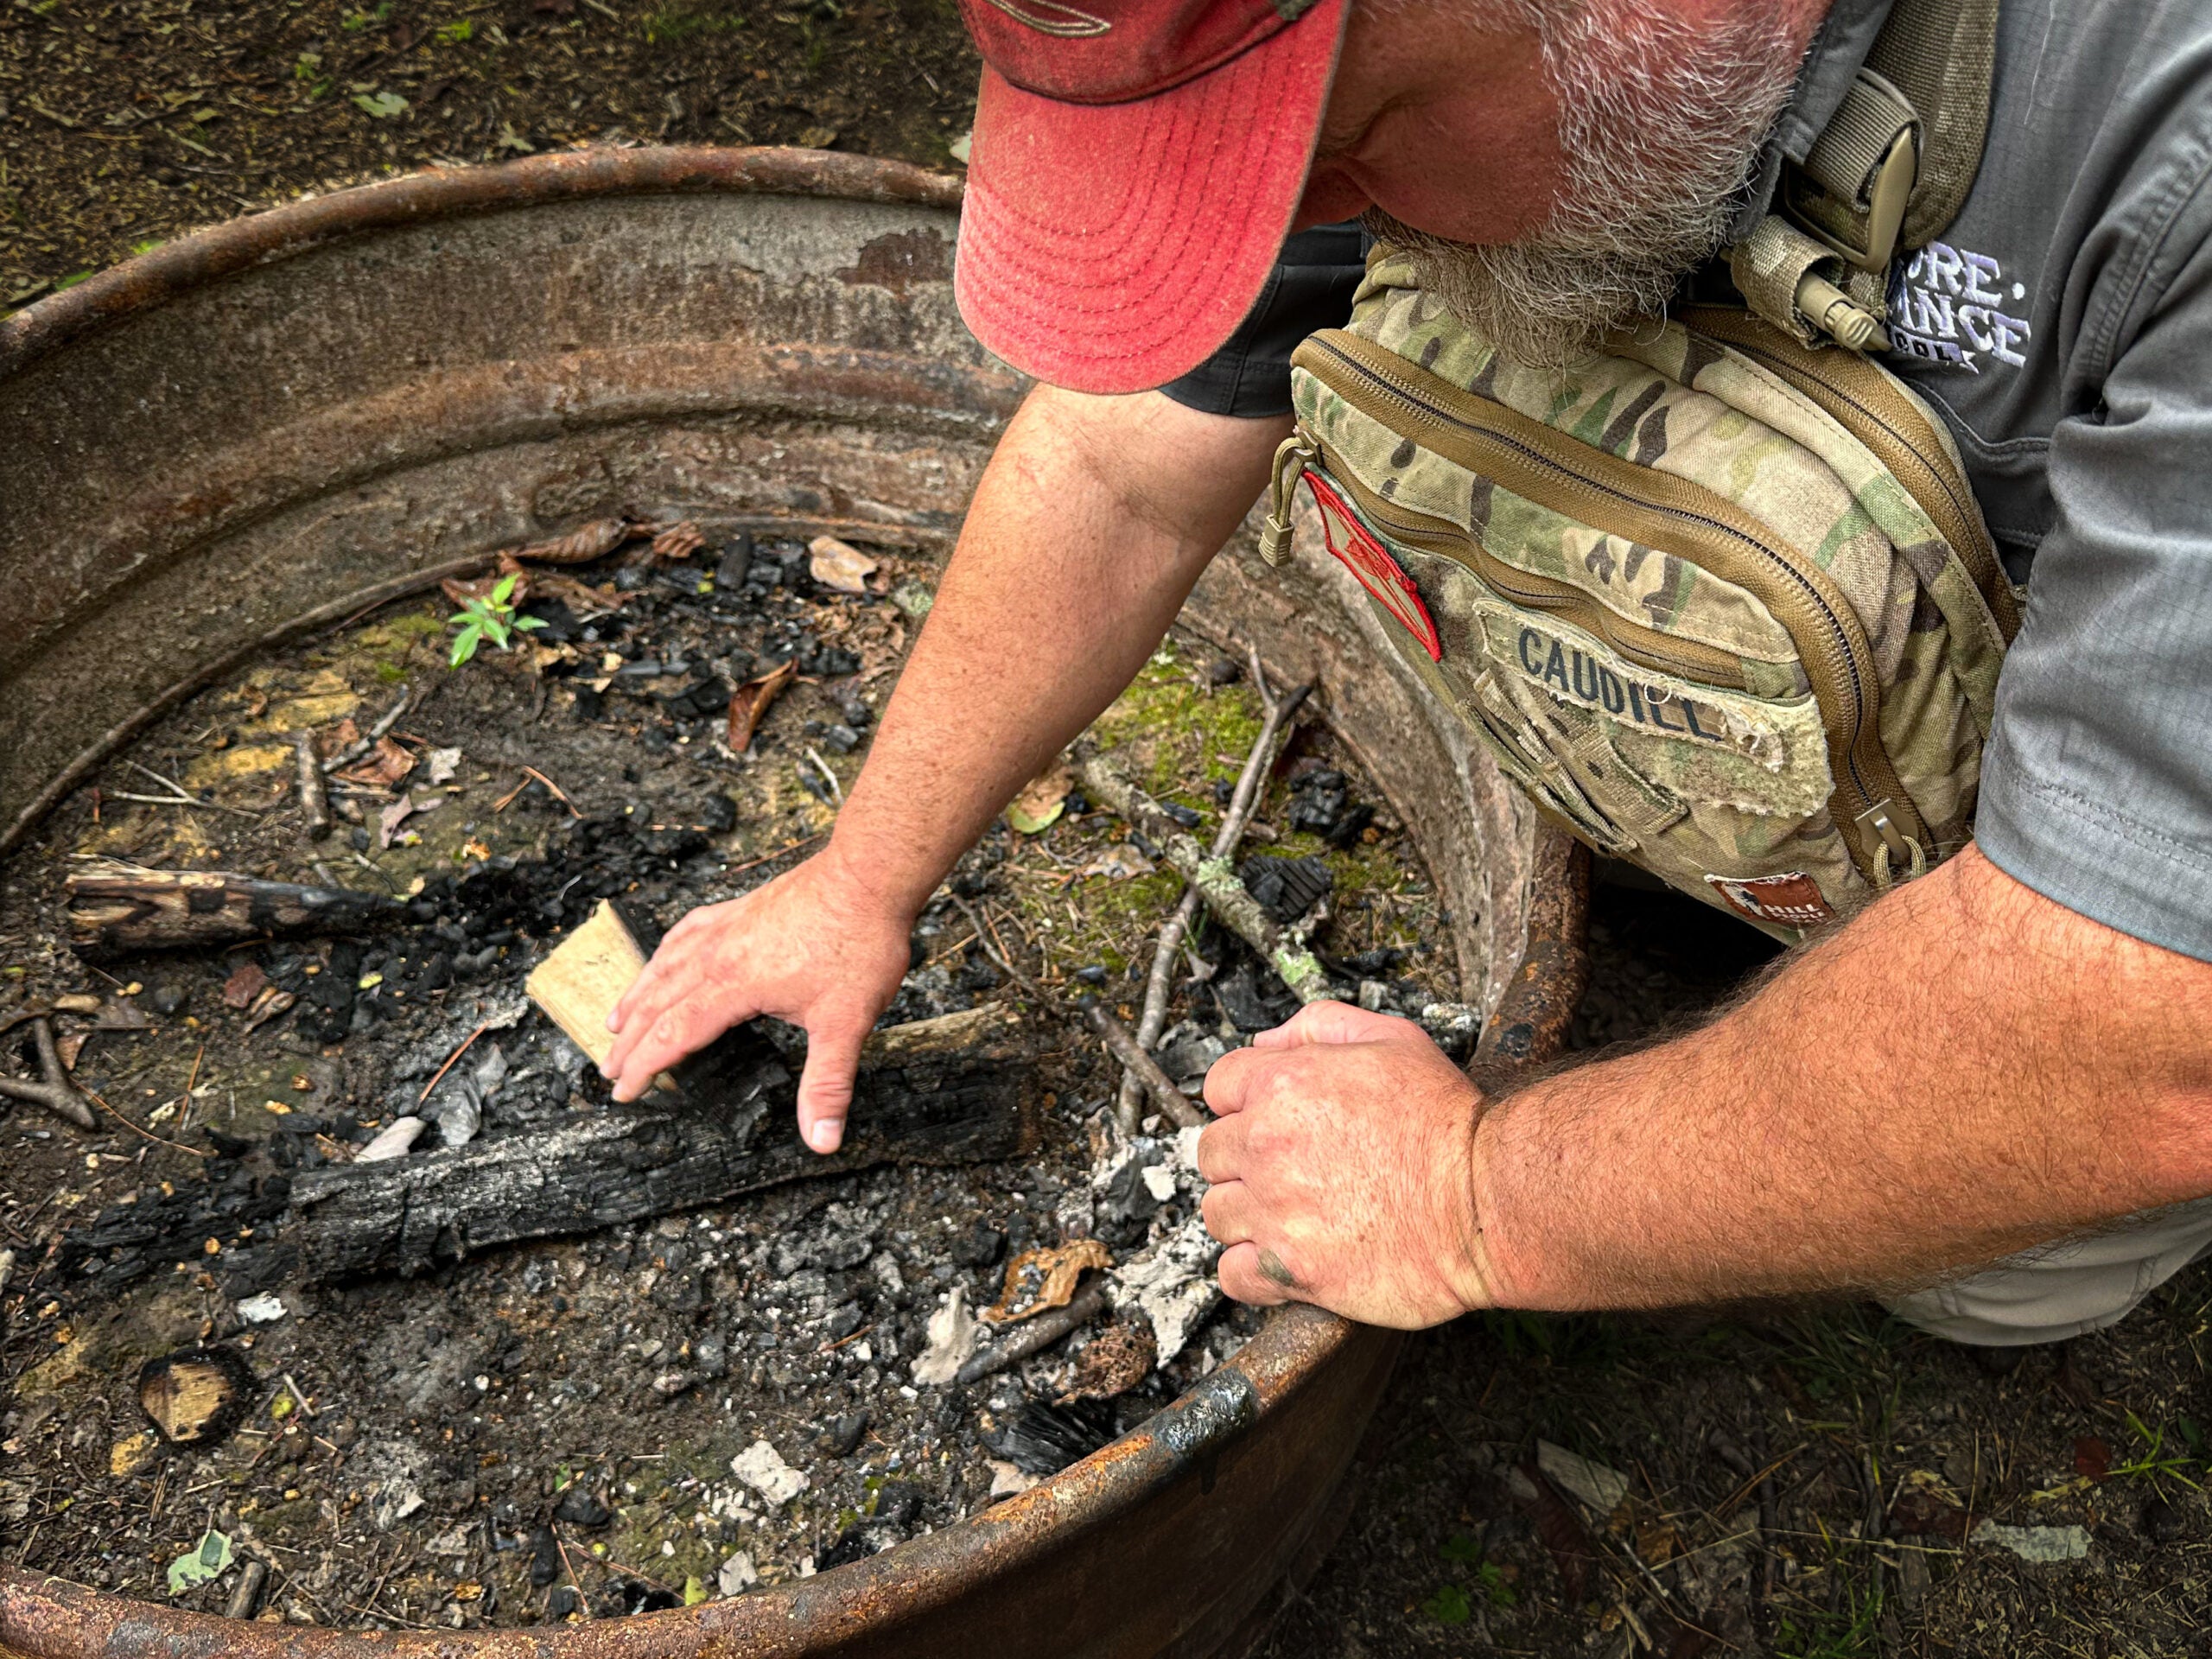 A camper wearing a red hat and a camo chest pack leans over a circular fire pit in the woods to make sure the coals are not smoldering.